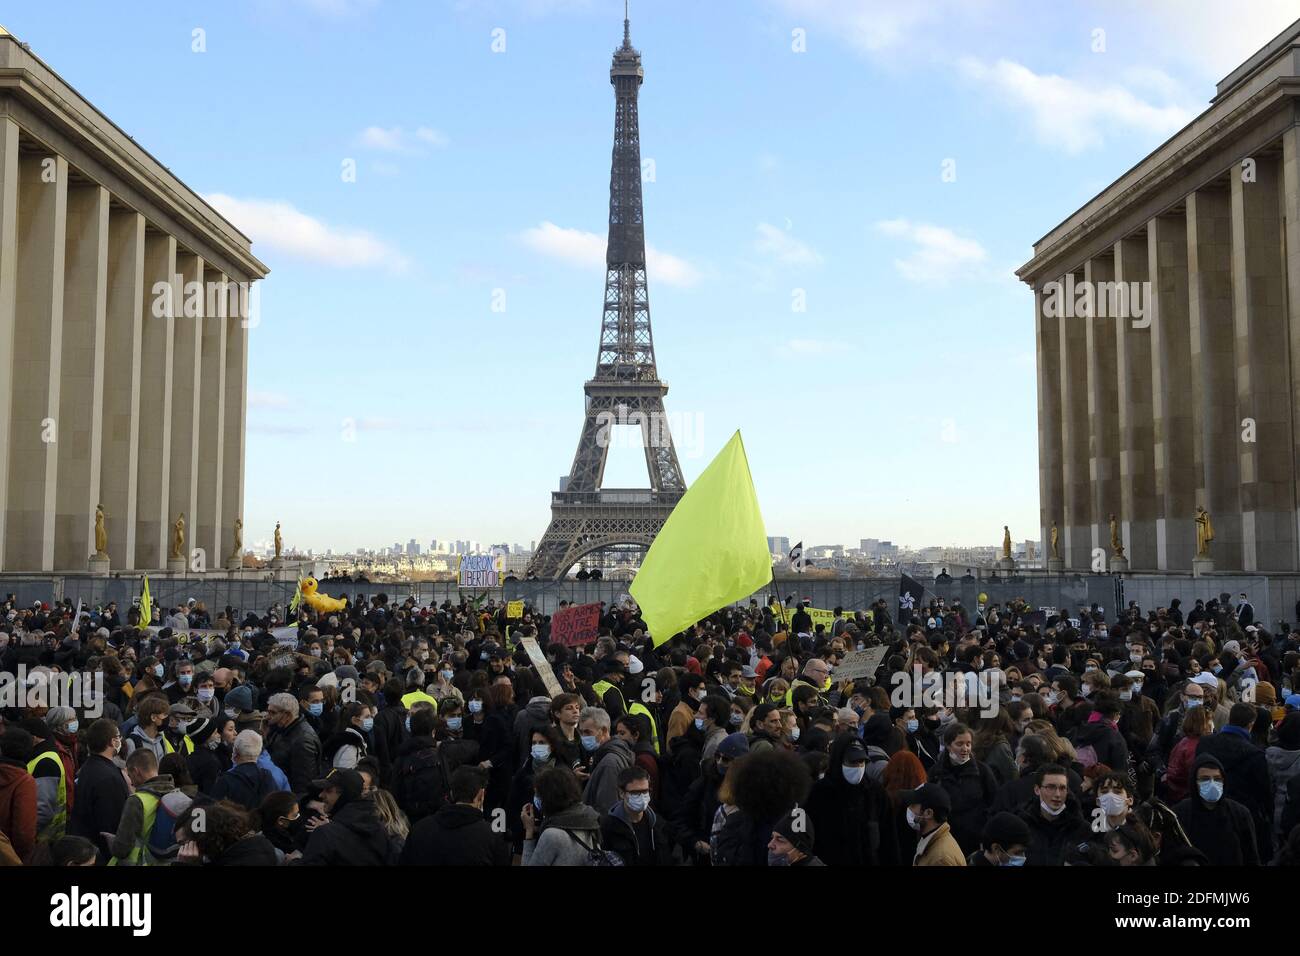 Protesters gather on Place du Trocadero near the Eiffel Tower to  demonstrate against the newly passed controversial global security law, in  Paris,The global security legislation passed by the French Parliament aims  to